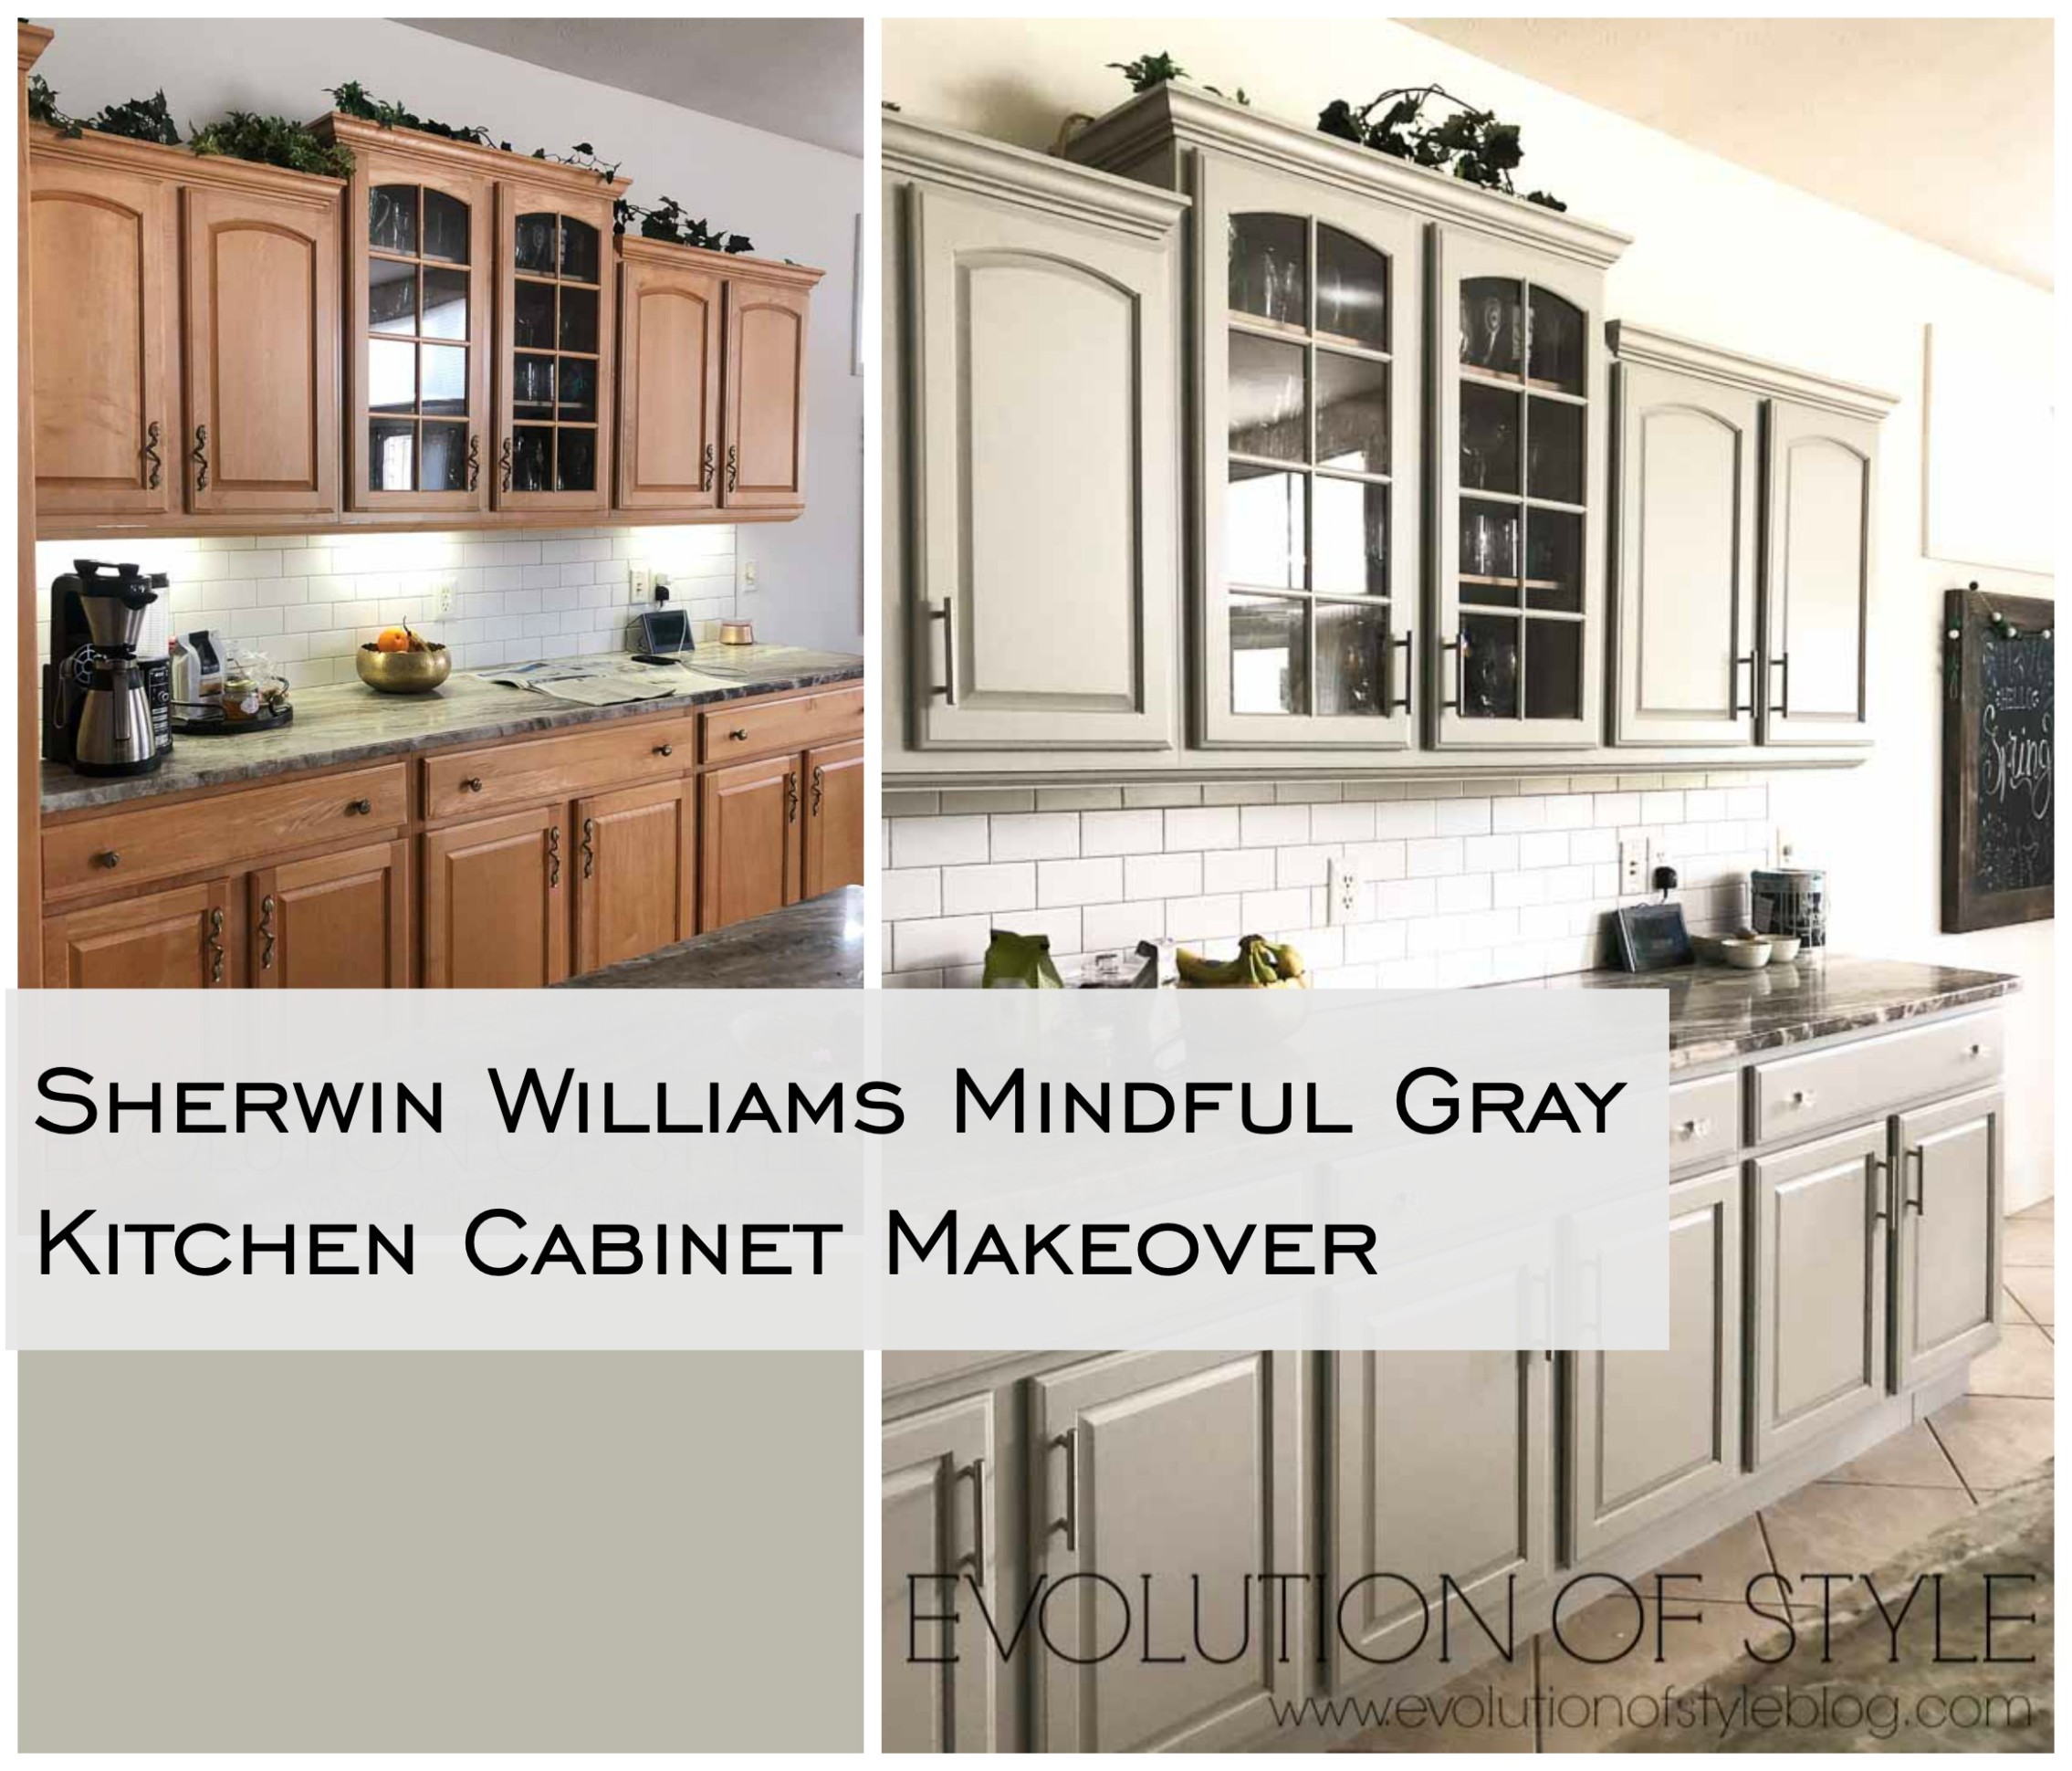 Mindful Gray Kitchen Cabinets - Evolution of Style - mindful gray kitchen cabinets